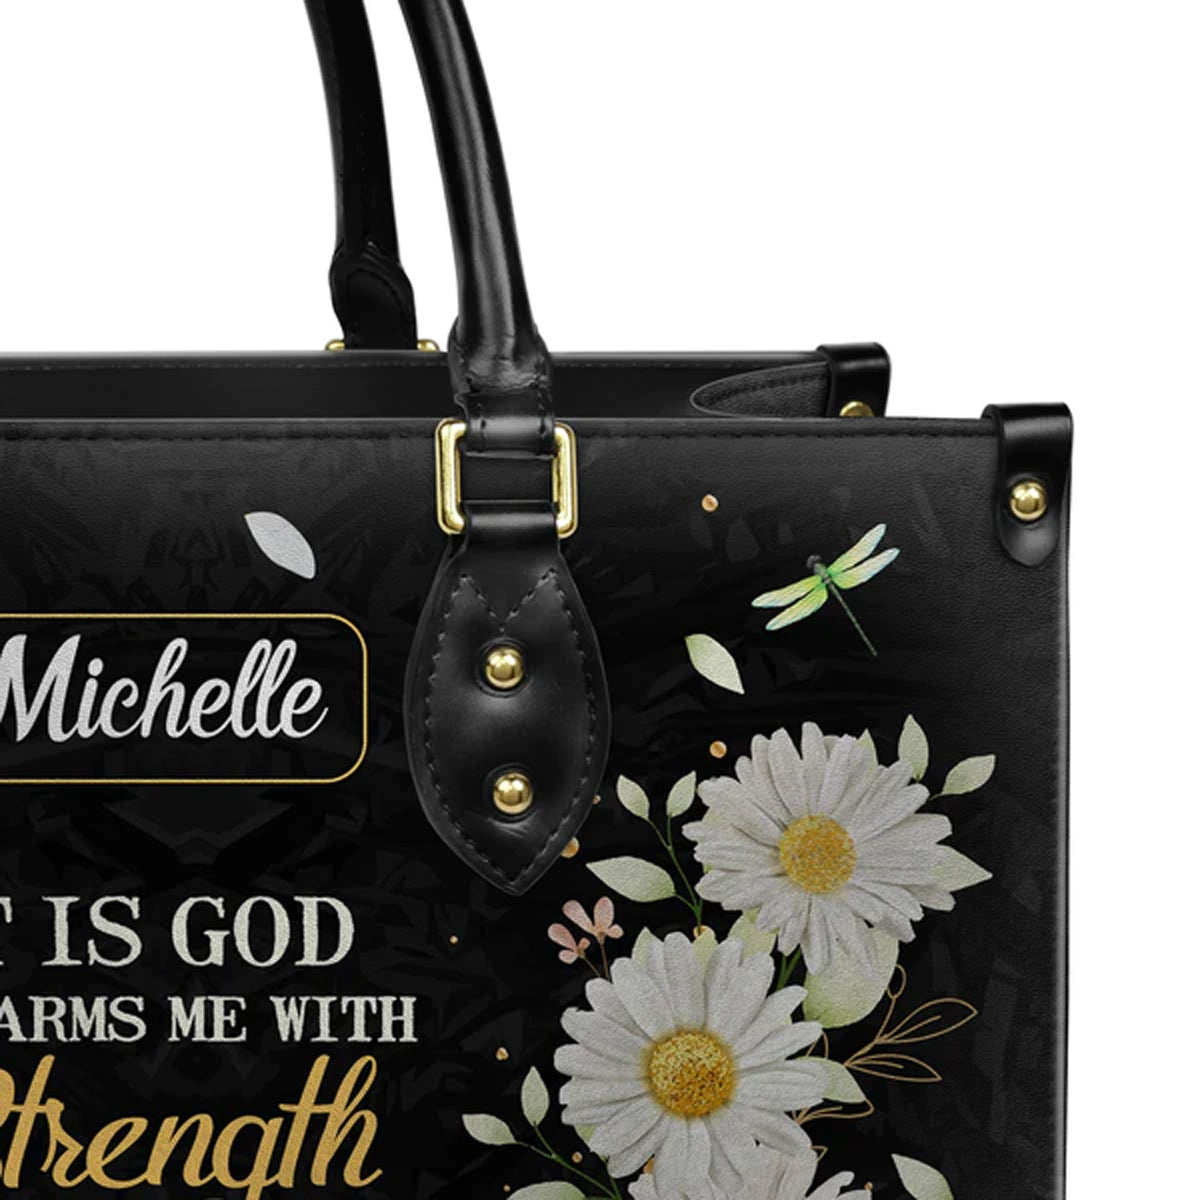 Christianart Designer Handbags, It Is God Who Arms Me With Strength Psalm 18:32 Daisy Dragonfly, Personalized Gifts, Gifts for Women, Christmas Gift. - Christian Art Bag